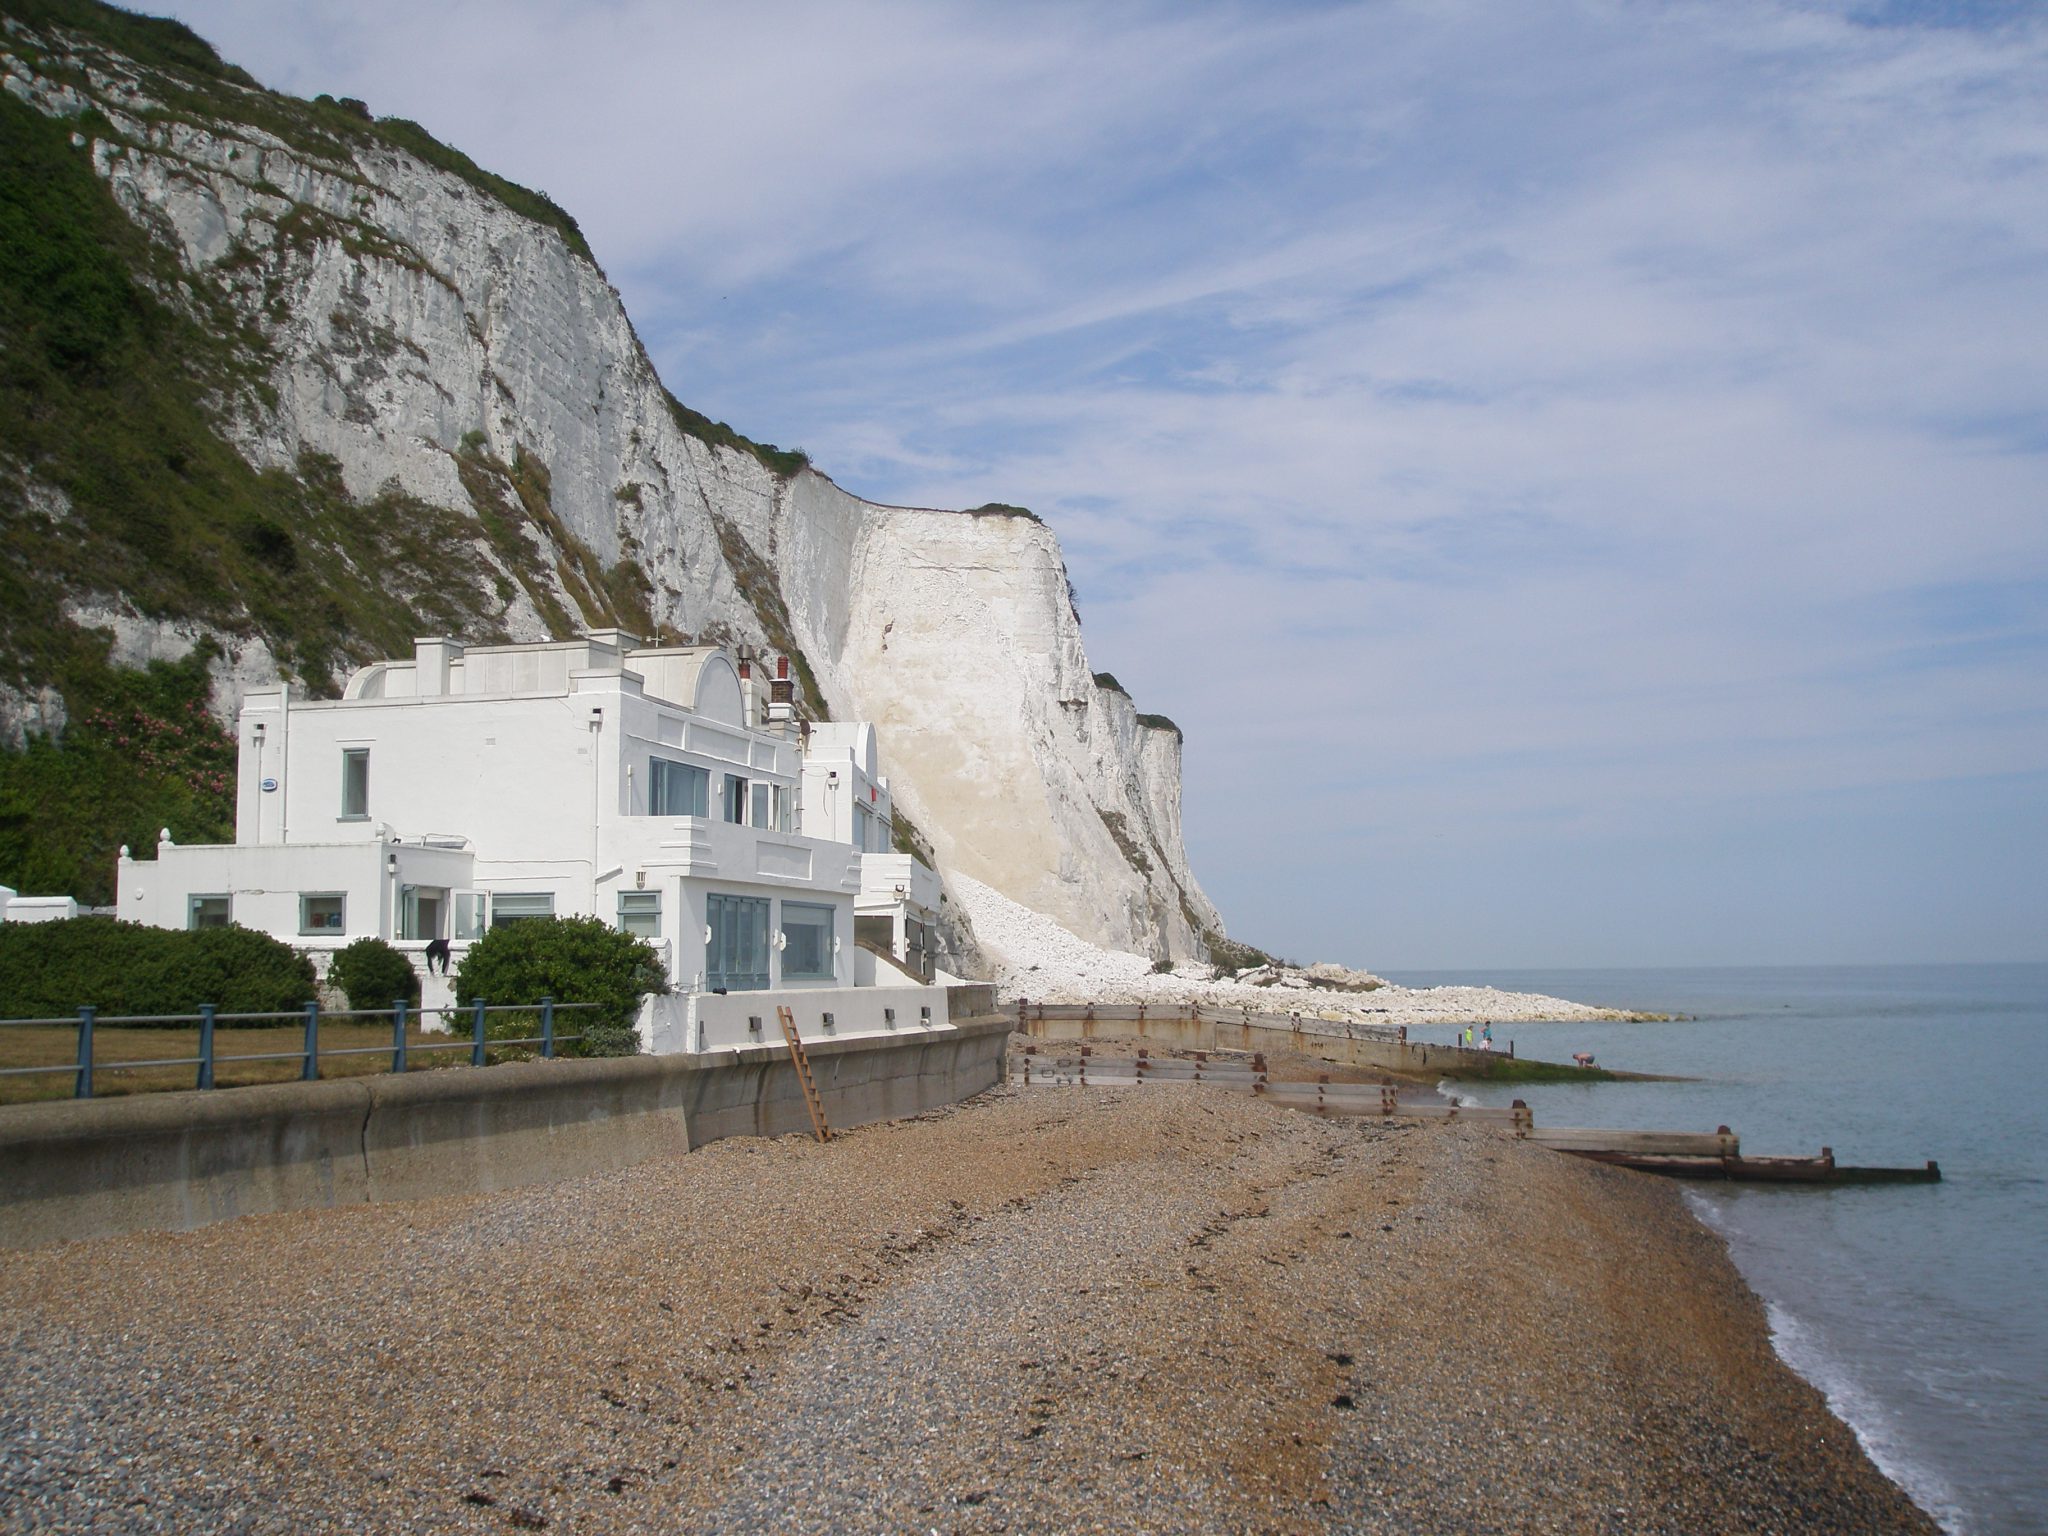 It's August 8, 2013, and we're at the Edge of England! These are the white cliffs of Saint Margaret's-at-Cliffe.